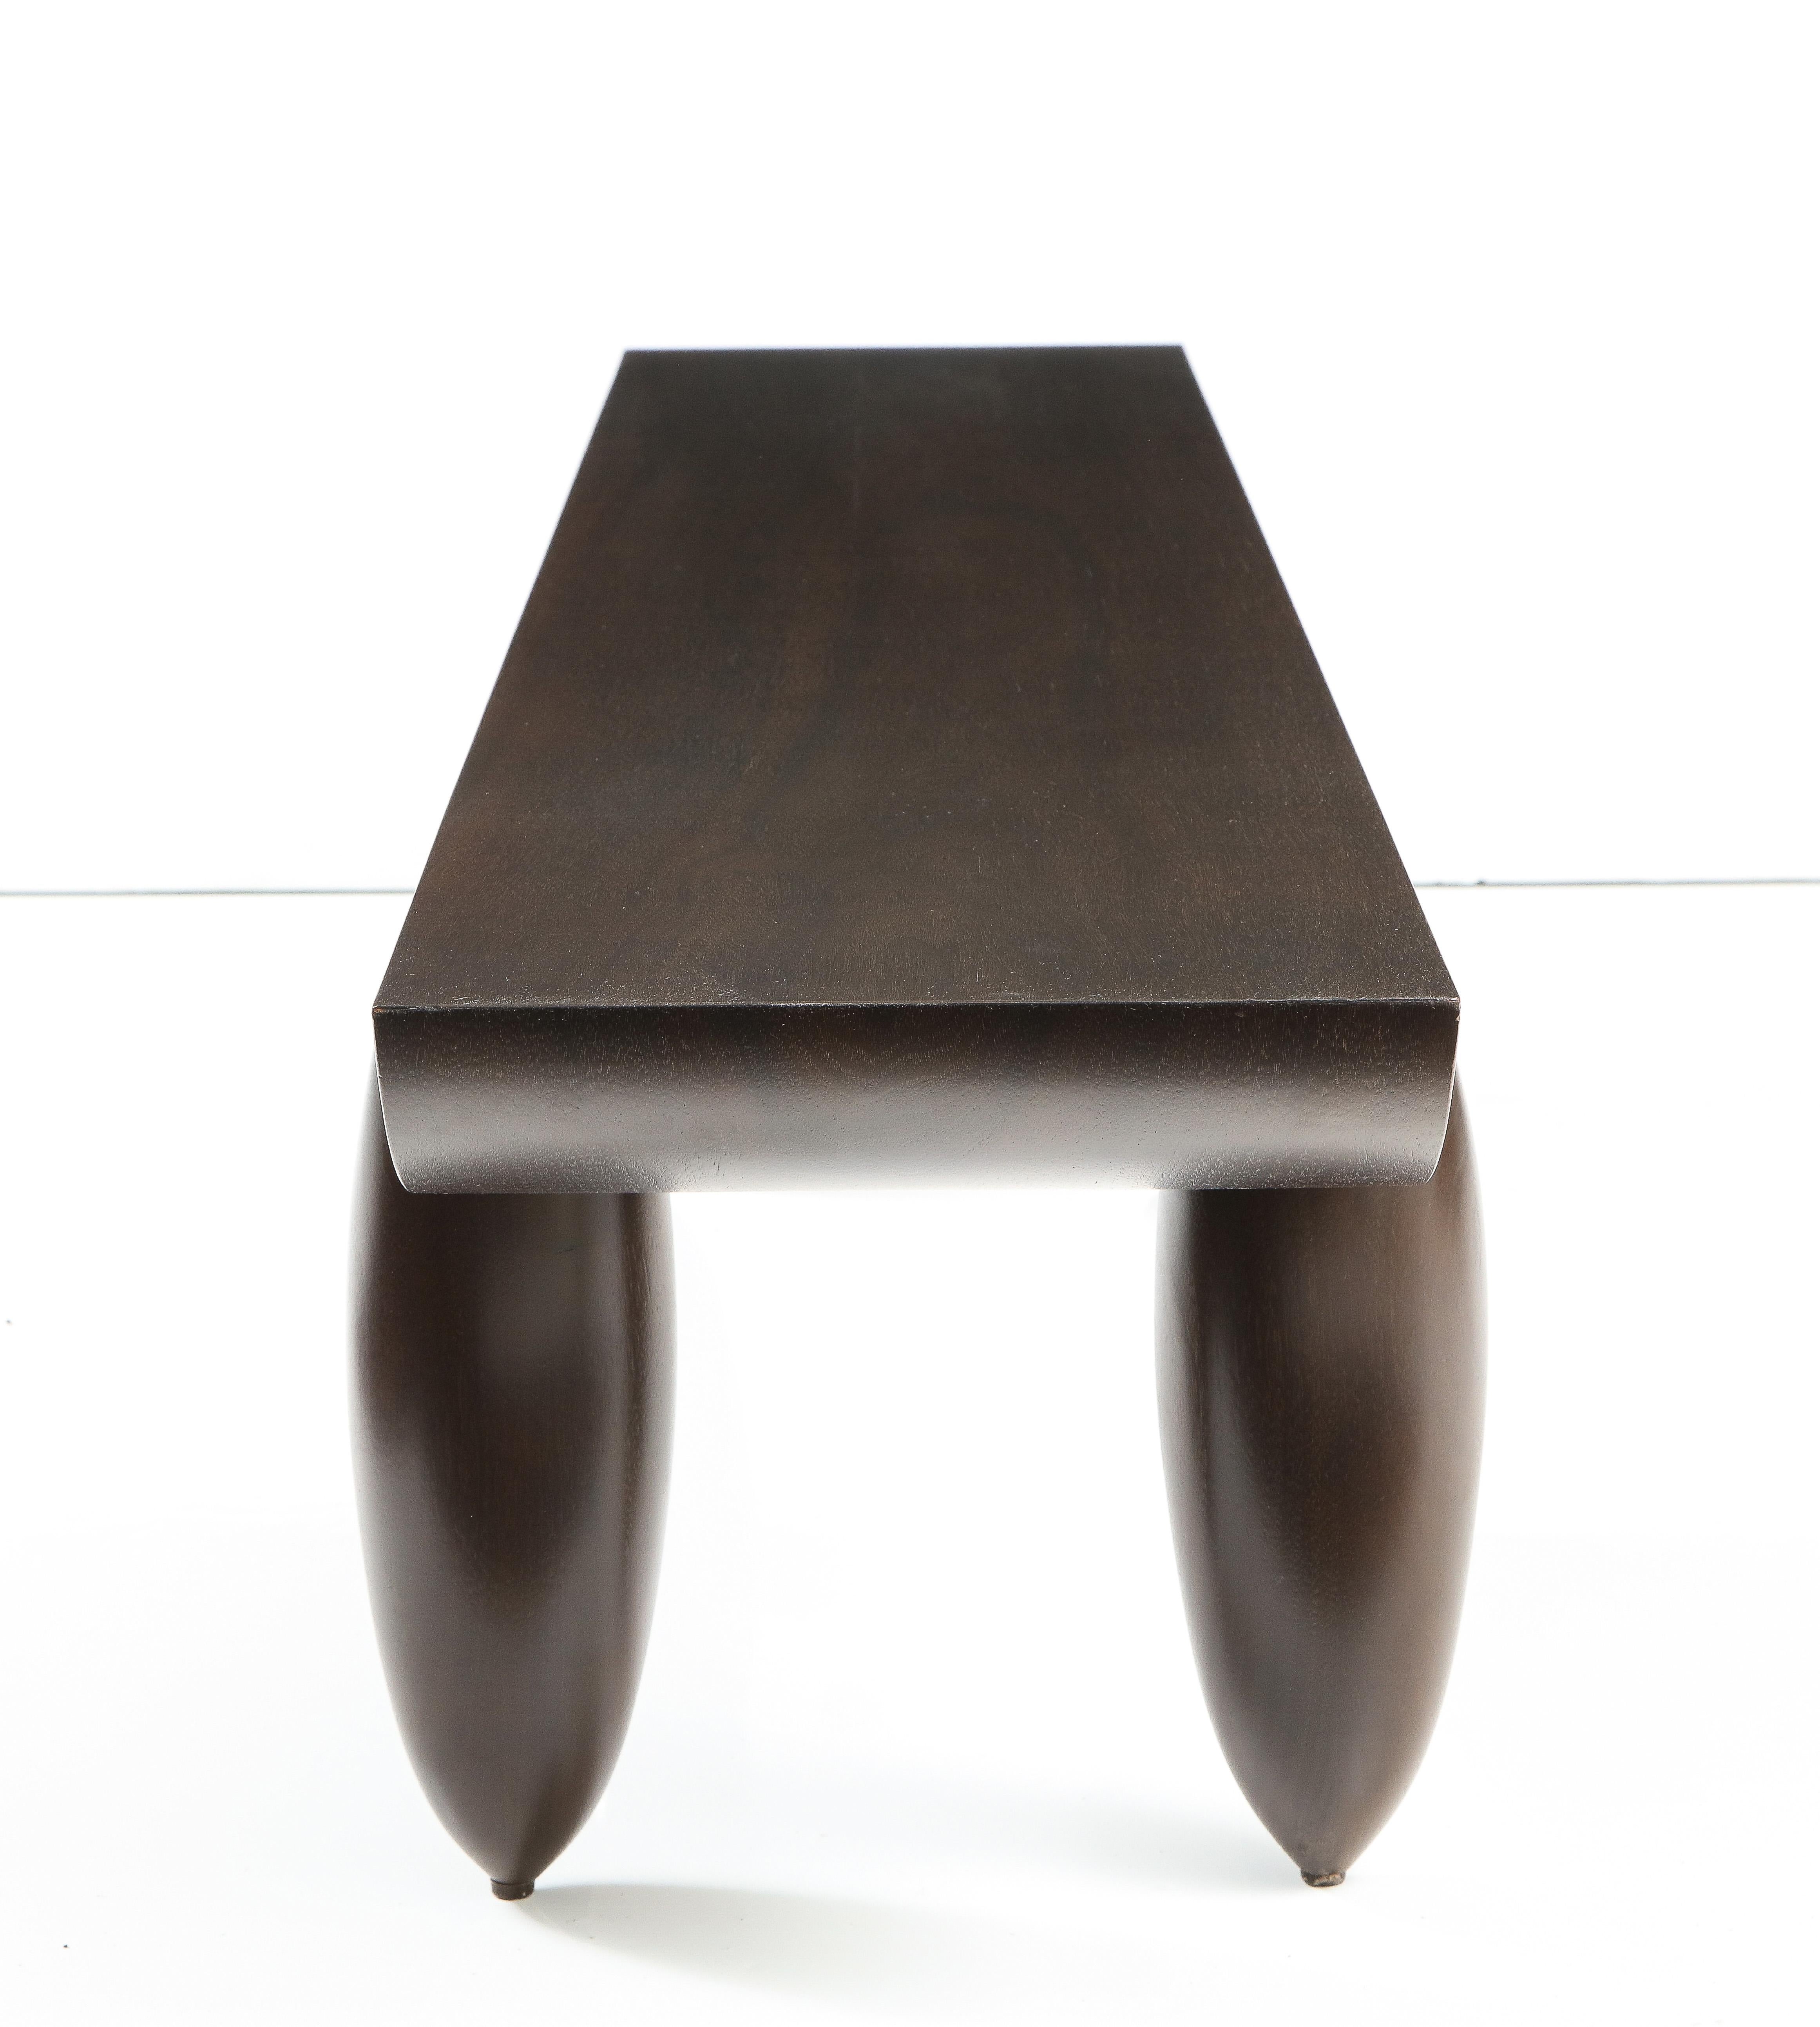 Wood Dark Brown Christian Liaigre Pirogue Bench for Holly Hunt